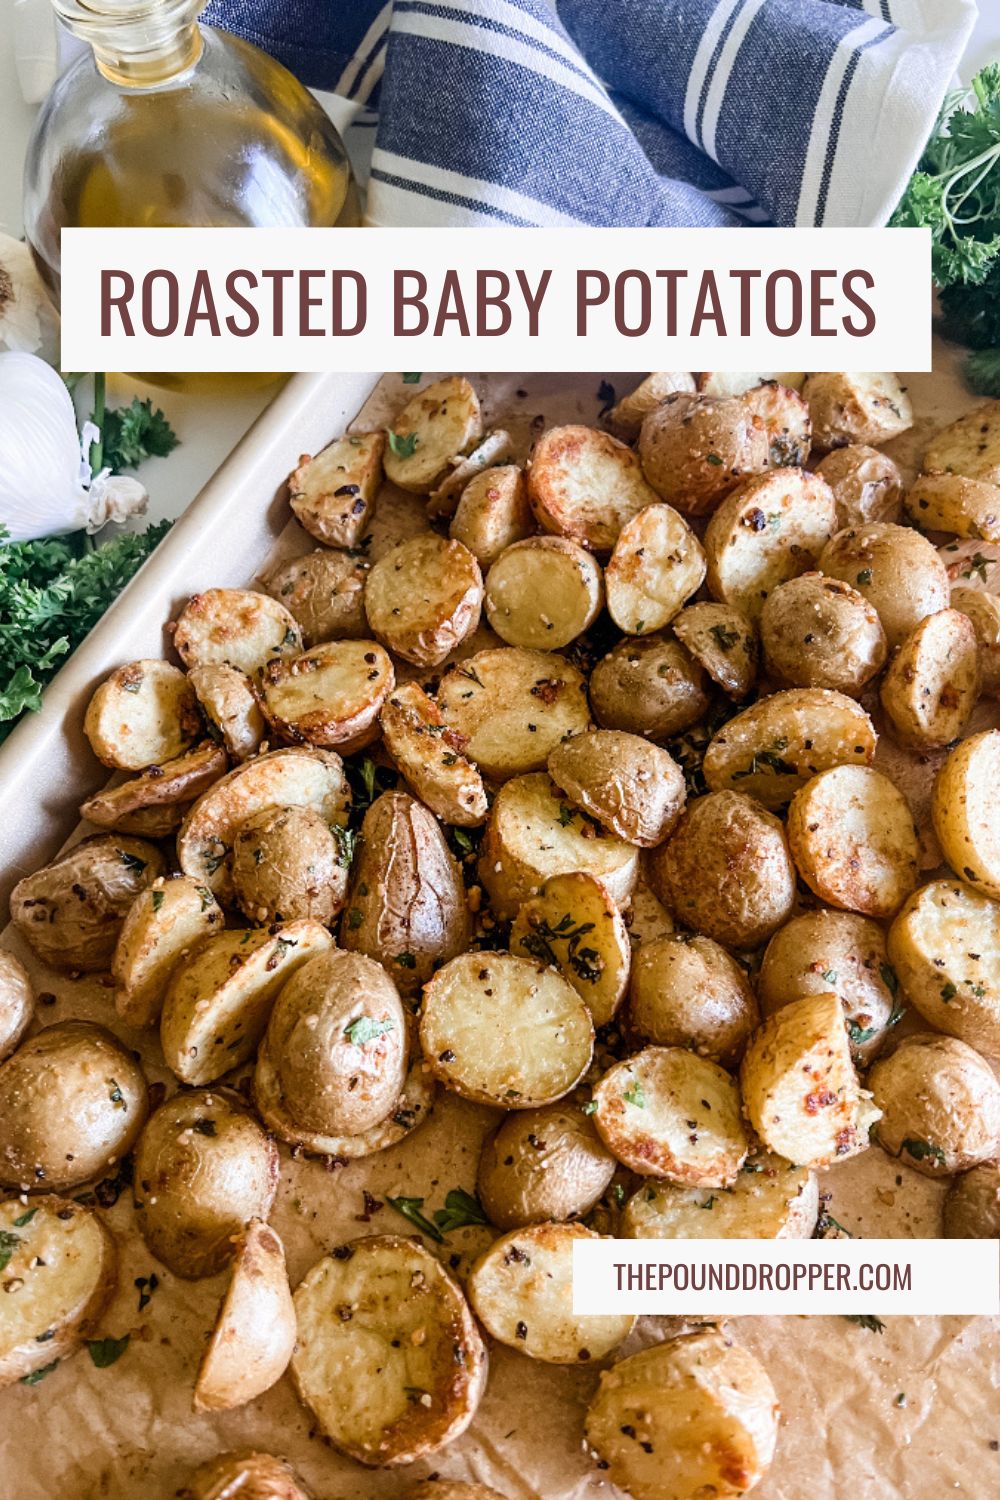 These Roasted Baby Potatoes are simple to make! No peeling involved, just toss in a homemade garlic olive oil seasoning and roasted until golden brown! An easy and delicious side dish for any meal! via @pounddropper